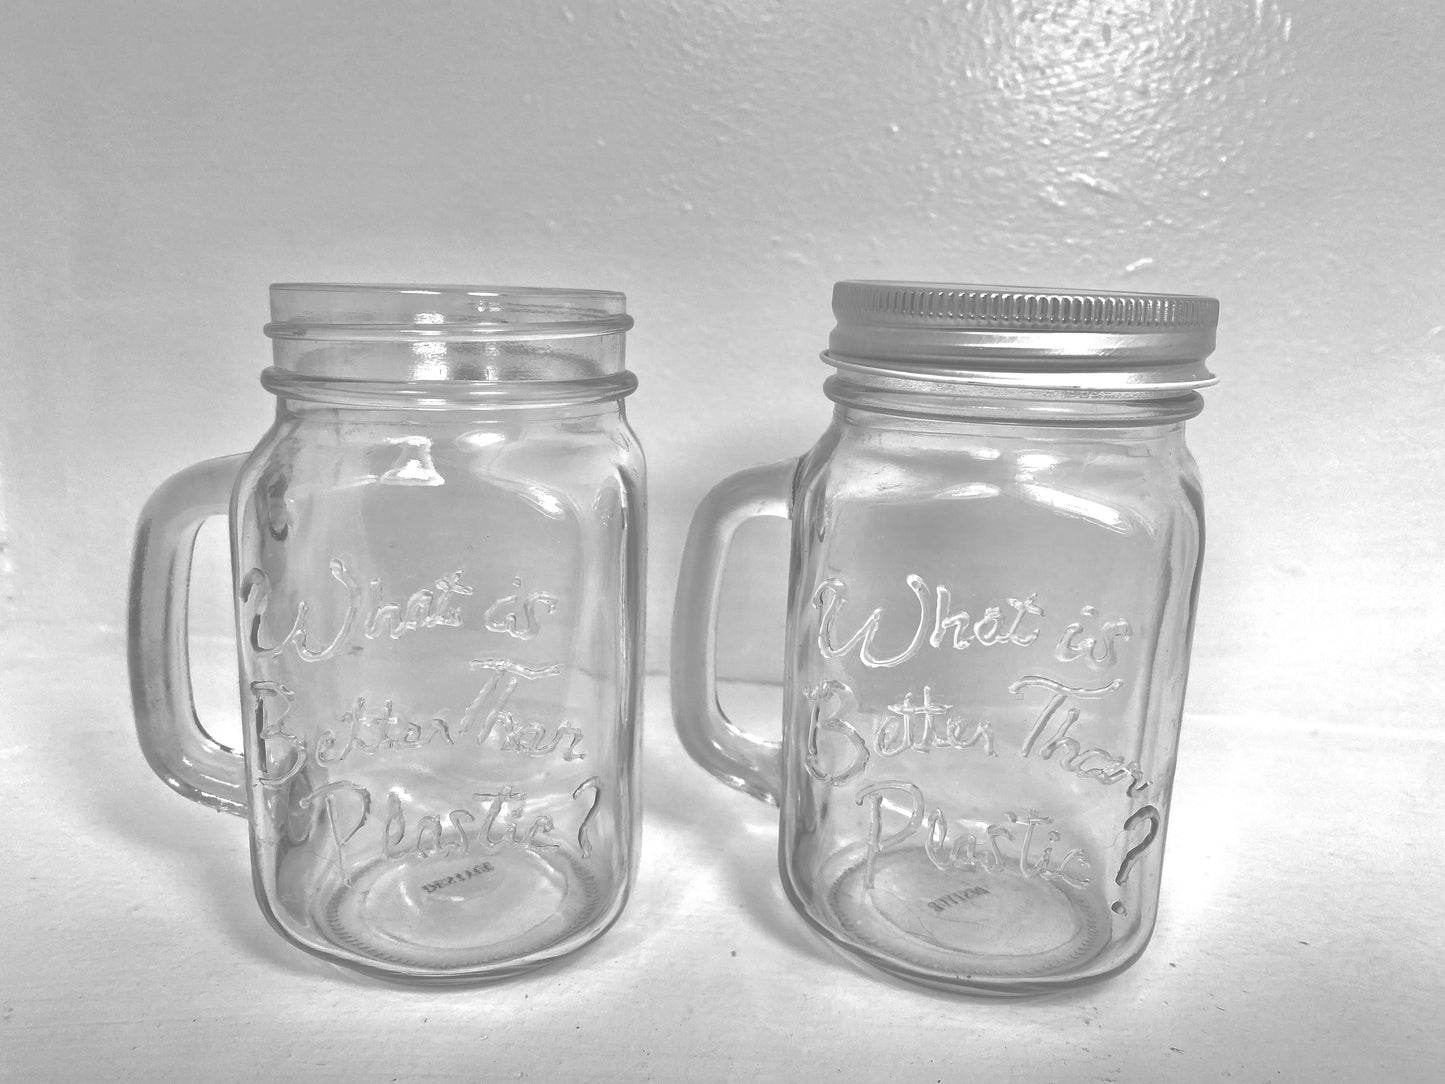 Set of (4) Drinking Mason Jars w/ Handles “What is Better Than Plastic?” Brand Embossed Glass